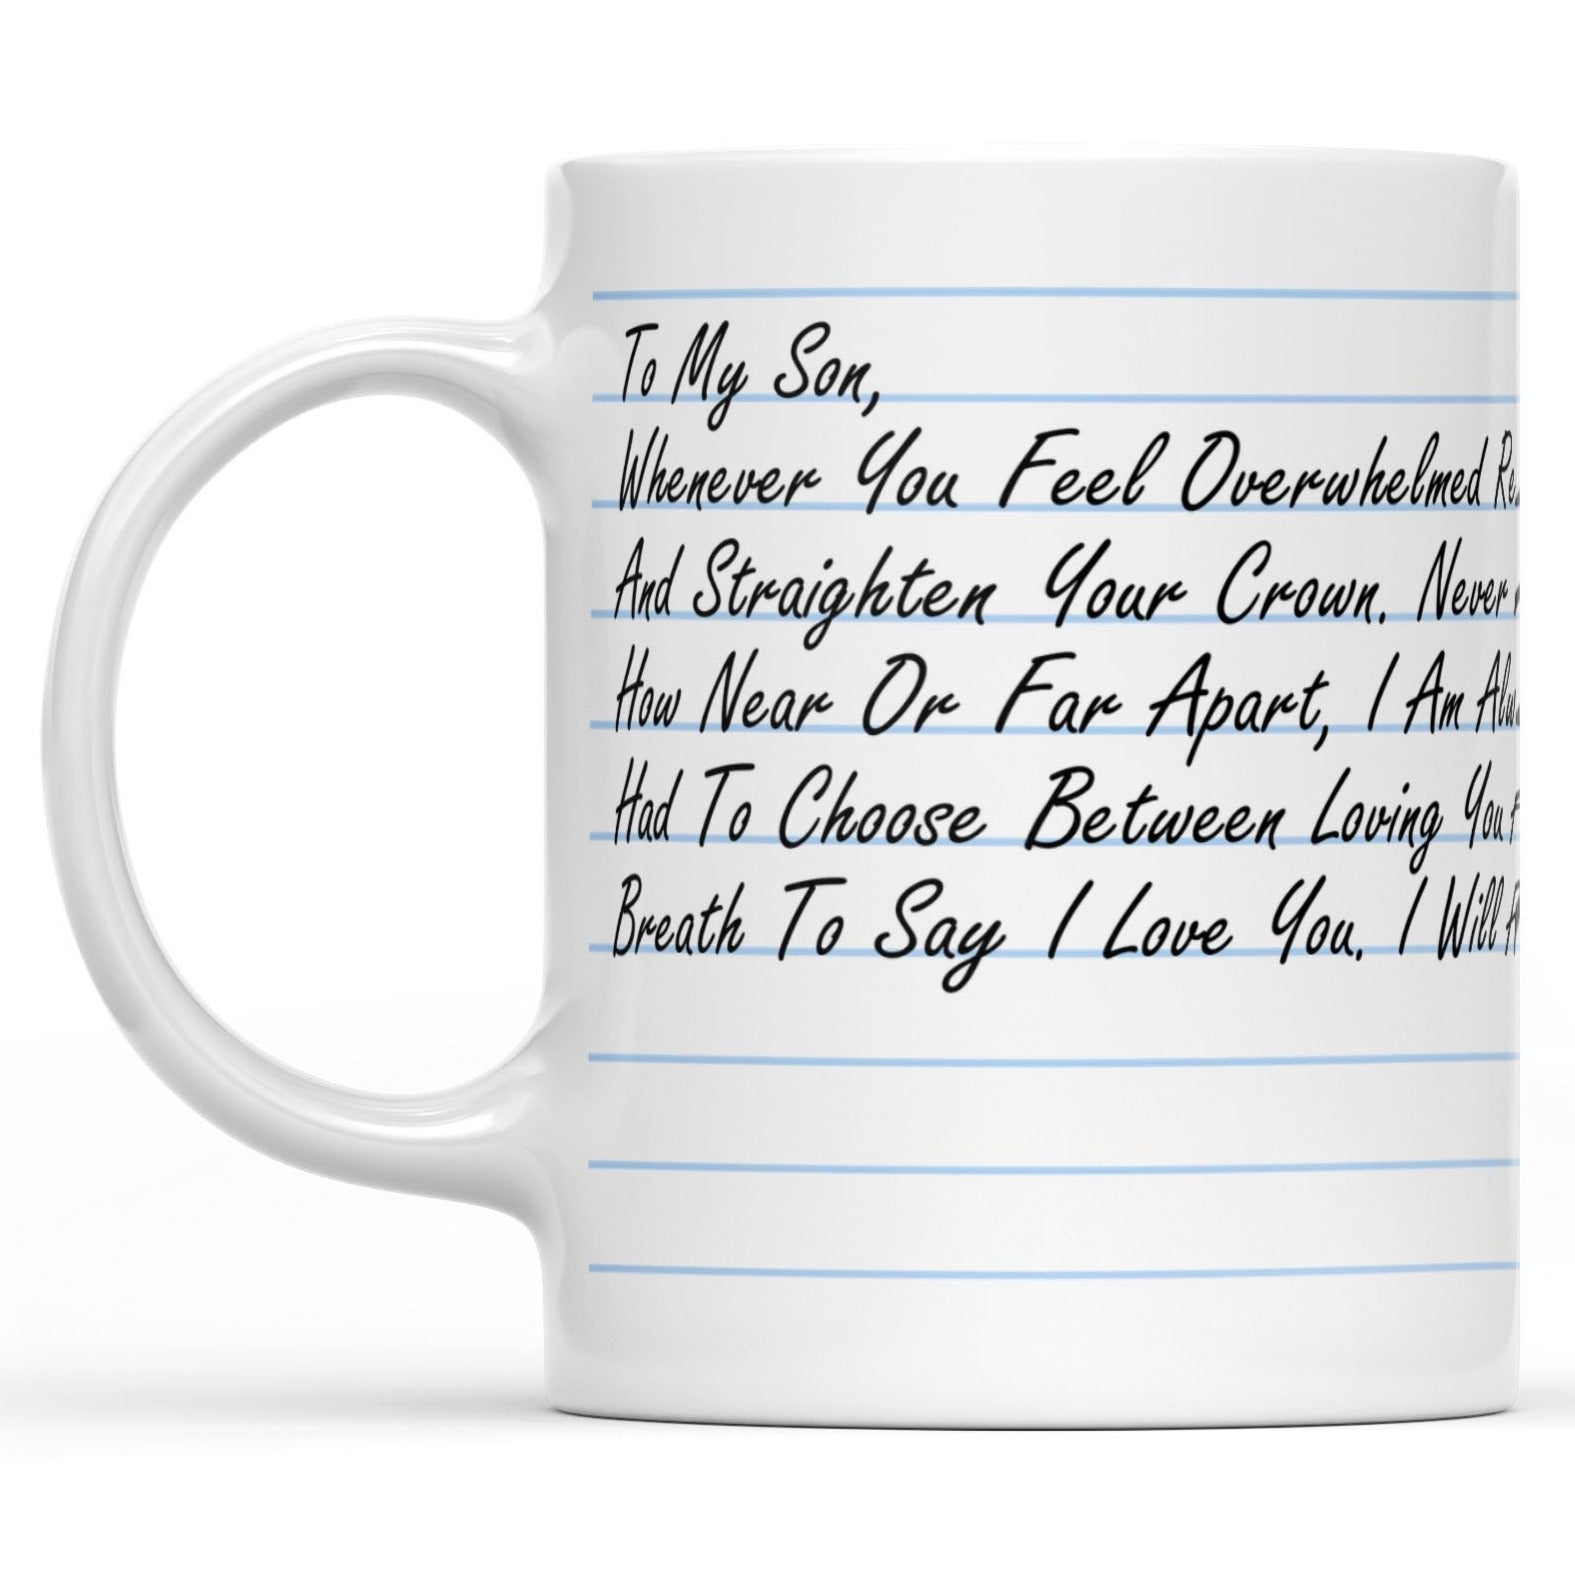 Personalized Message Letter for Son from Dad Gift Mug, Custom Mug Gift for Son